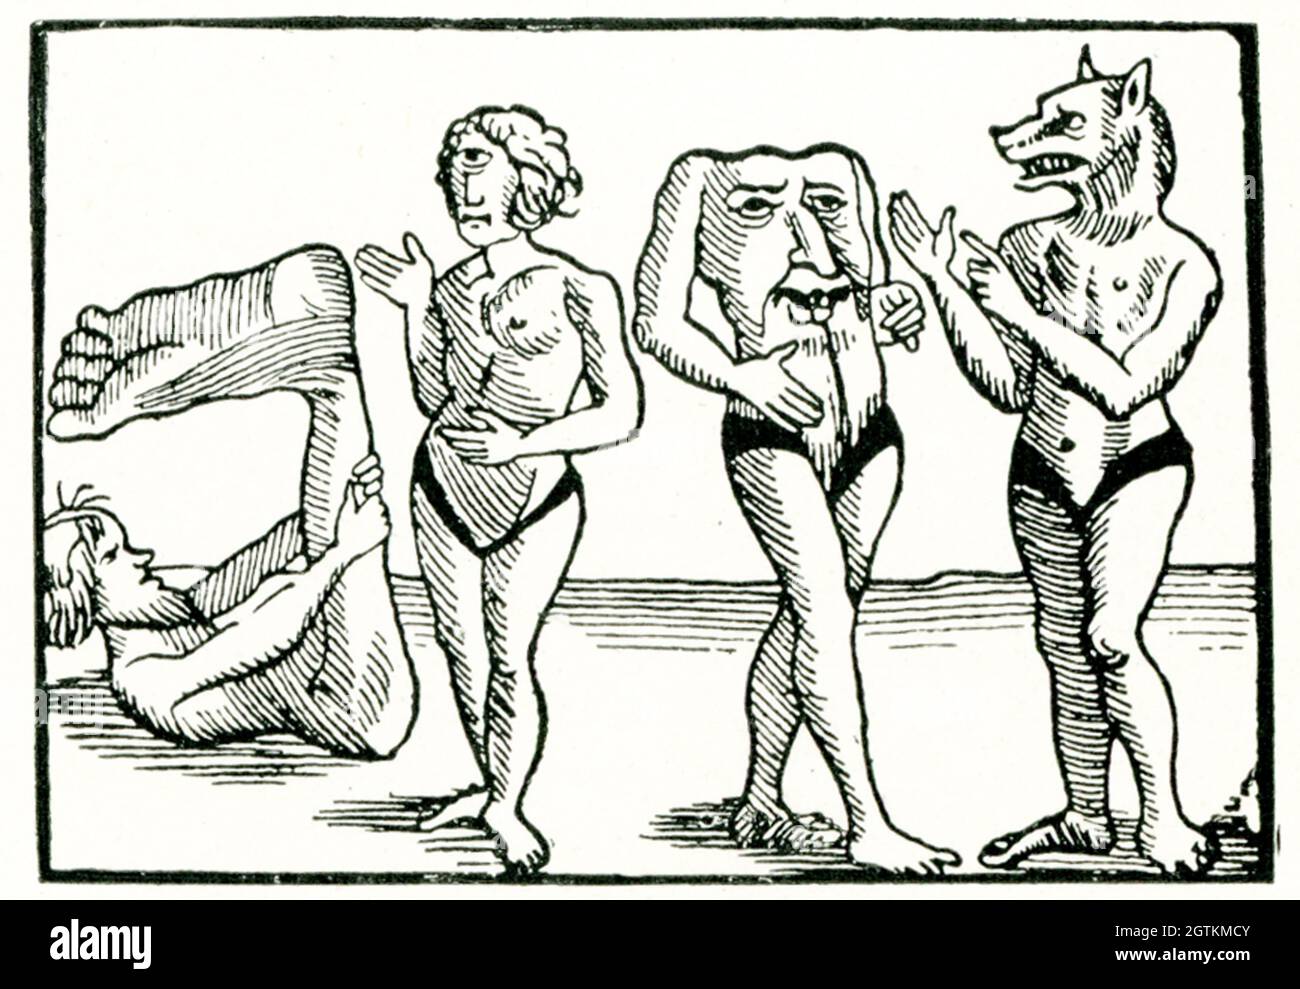 This illustration from Sir John Mandeville shows geographical monsters. Sir John Mandeville is the supposed author of The Travels of Sir John Mandeville, a travel memoir which first circulated between 1357 and 1371. The earliest surviving text is in French. By aid of translations into many other languages, the work acquired extraordinary popularity. Stock Photo